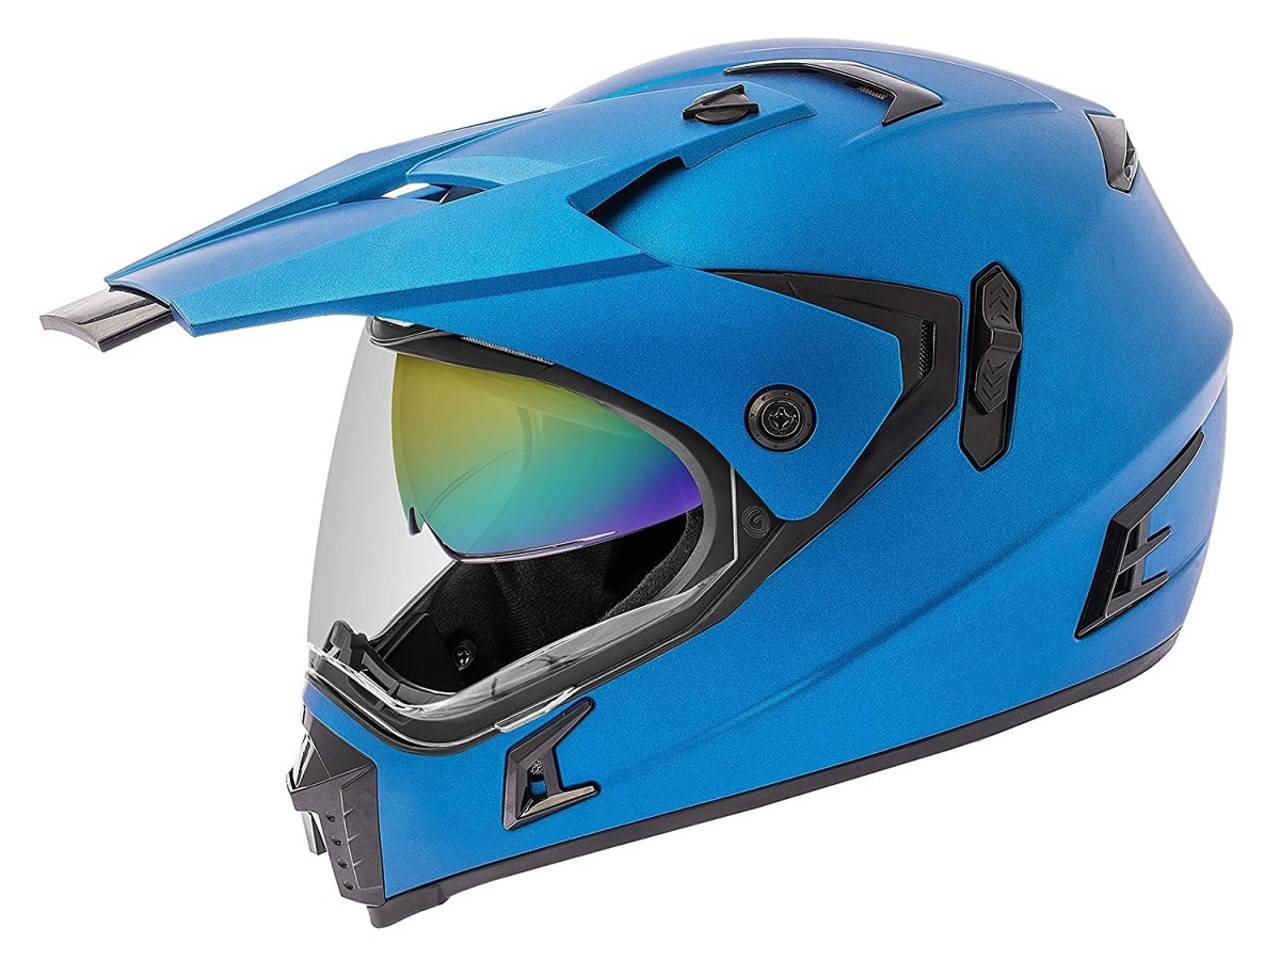 Double visor helmets Top 7 choices for passionate riders 